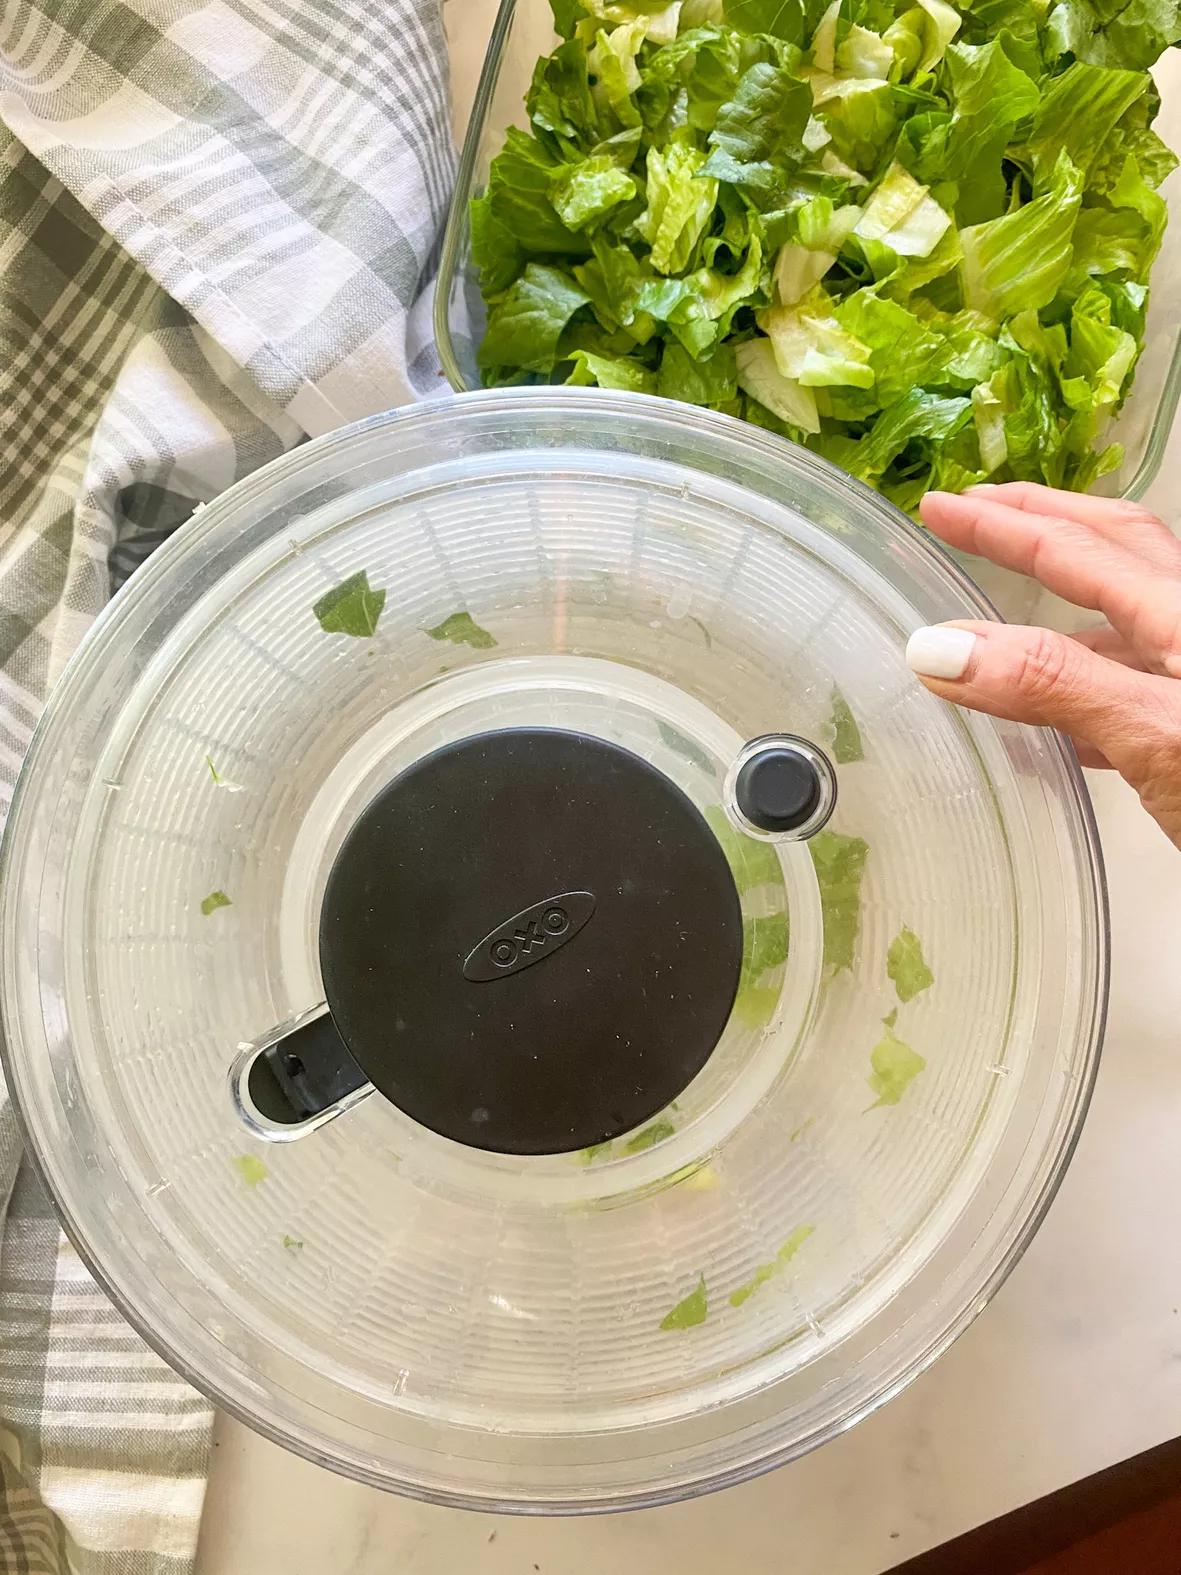 OXO Large Salad Spinner + Reviews